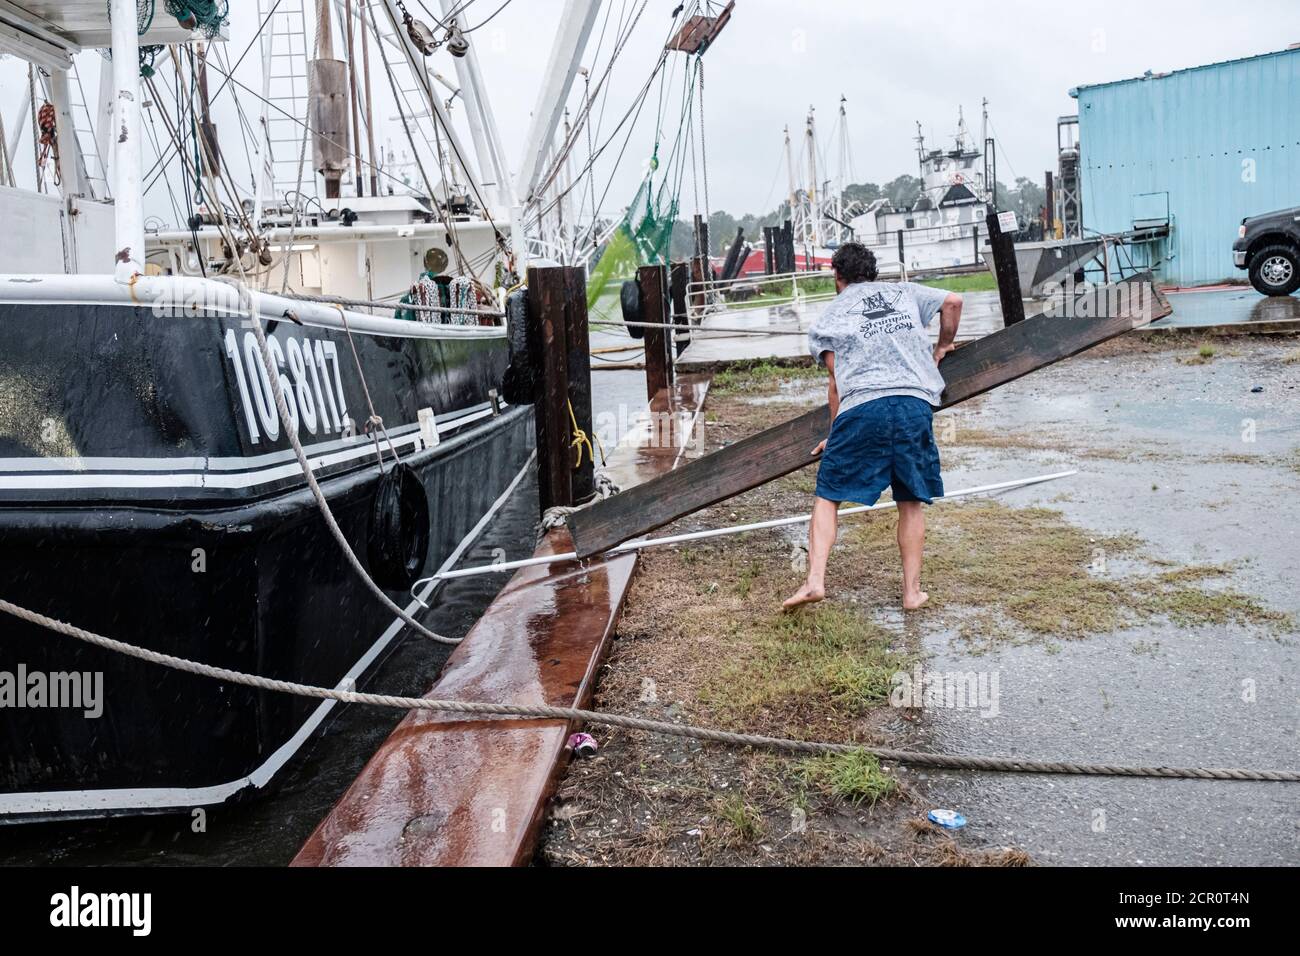 Bayou La Batre, ALABAMA, USA. 15th Sep, 2019. Forrest Collier tries to get onboard his fishing boat The Emily Ariel while Hurricane Sally pushes wind and rain into Bayou La Batre, Alabama USA on September 15, 2020. Hurricane Sally is predicted to make landfall as a Category 2 Hurricane. Credit: Dan Anderson/ZUMA Wire/Alamy Live News Stock Photo